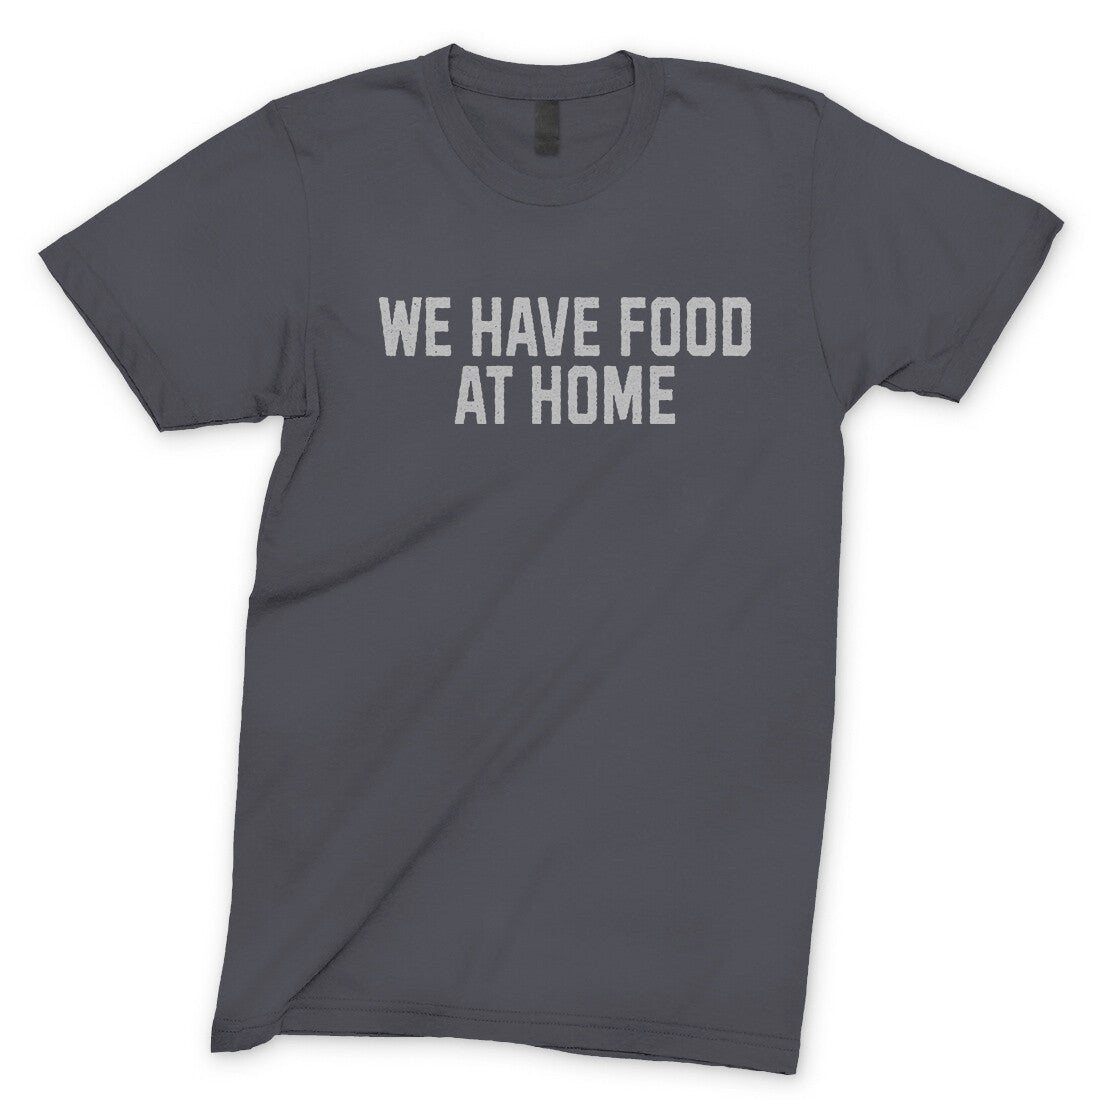 We Have Food at Home in Charcoal Color